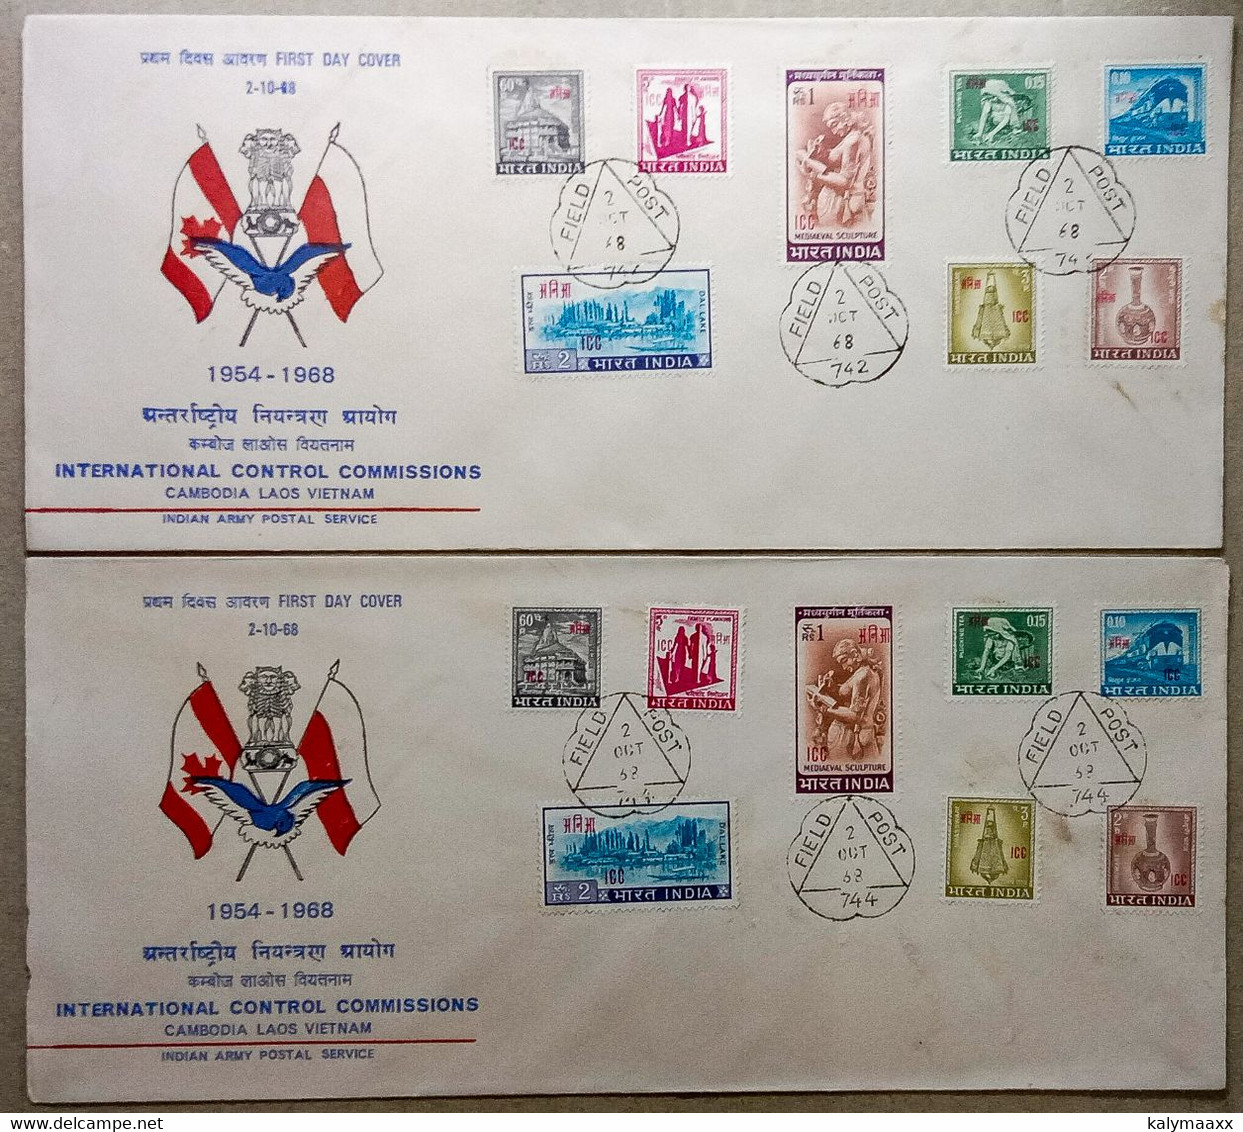 INDIA 1968 ICC OVERPRINTED COMPLETE SET OF 2 F.P.O CANCELLED COVERS & INFORMATION BROCHURE, VIETNAM, LAOS, CAMBODIA - Militaire Vrijstelling Van Portkosten